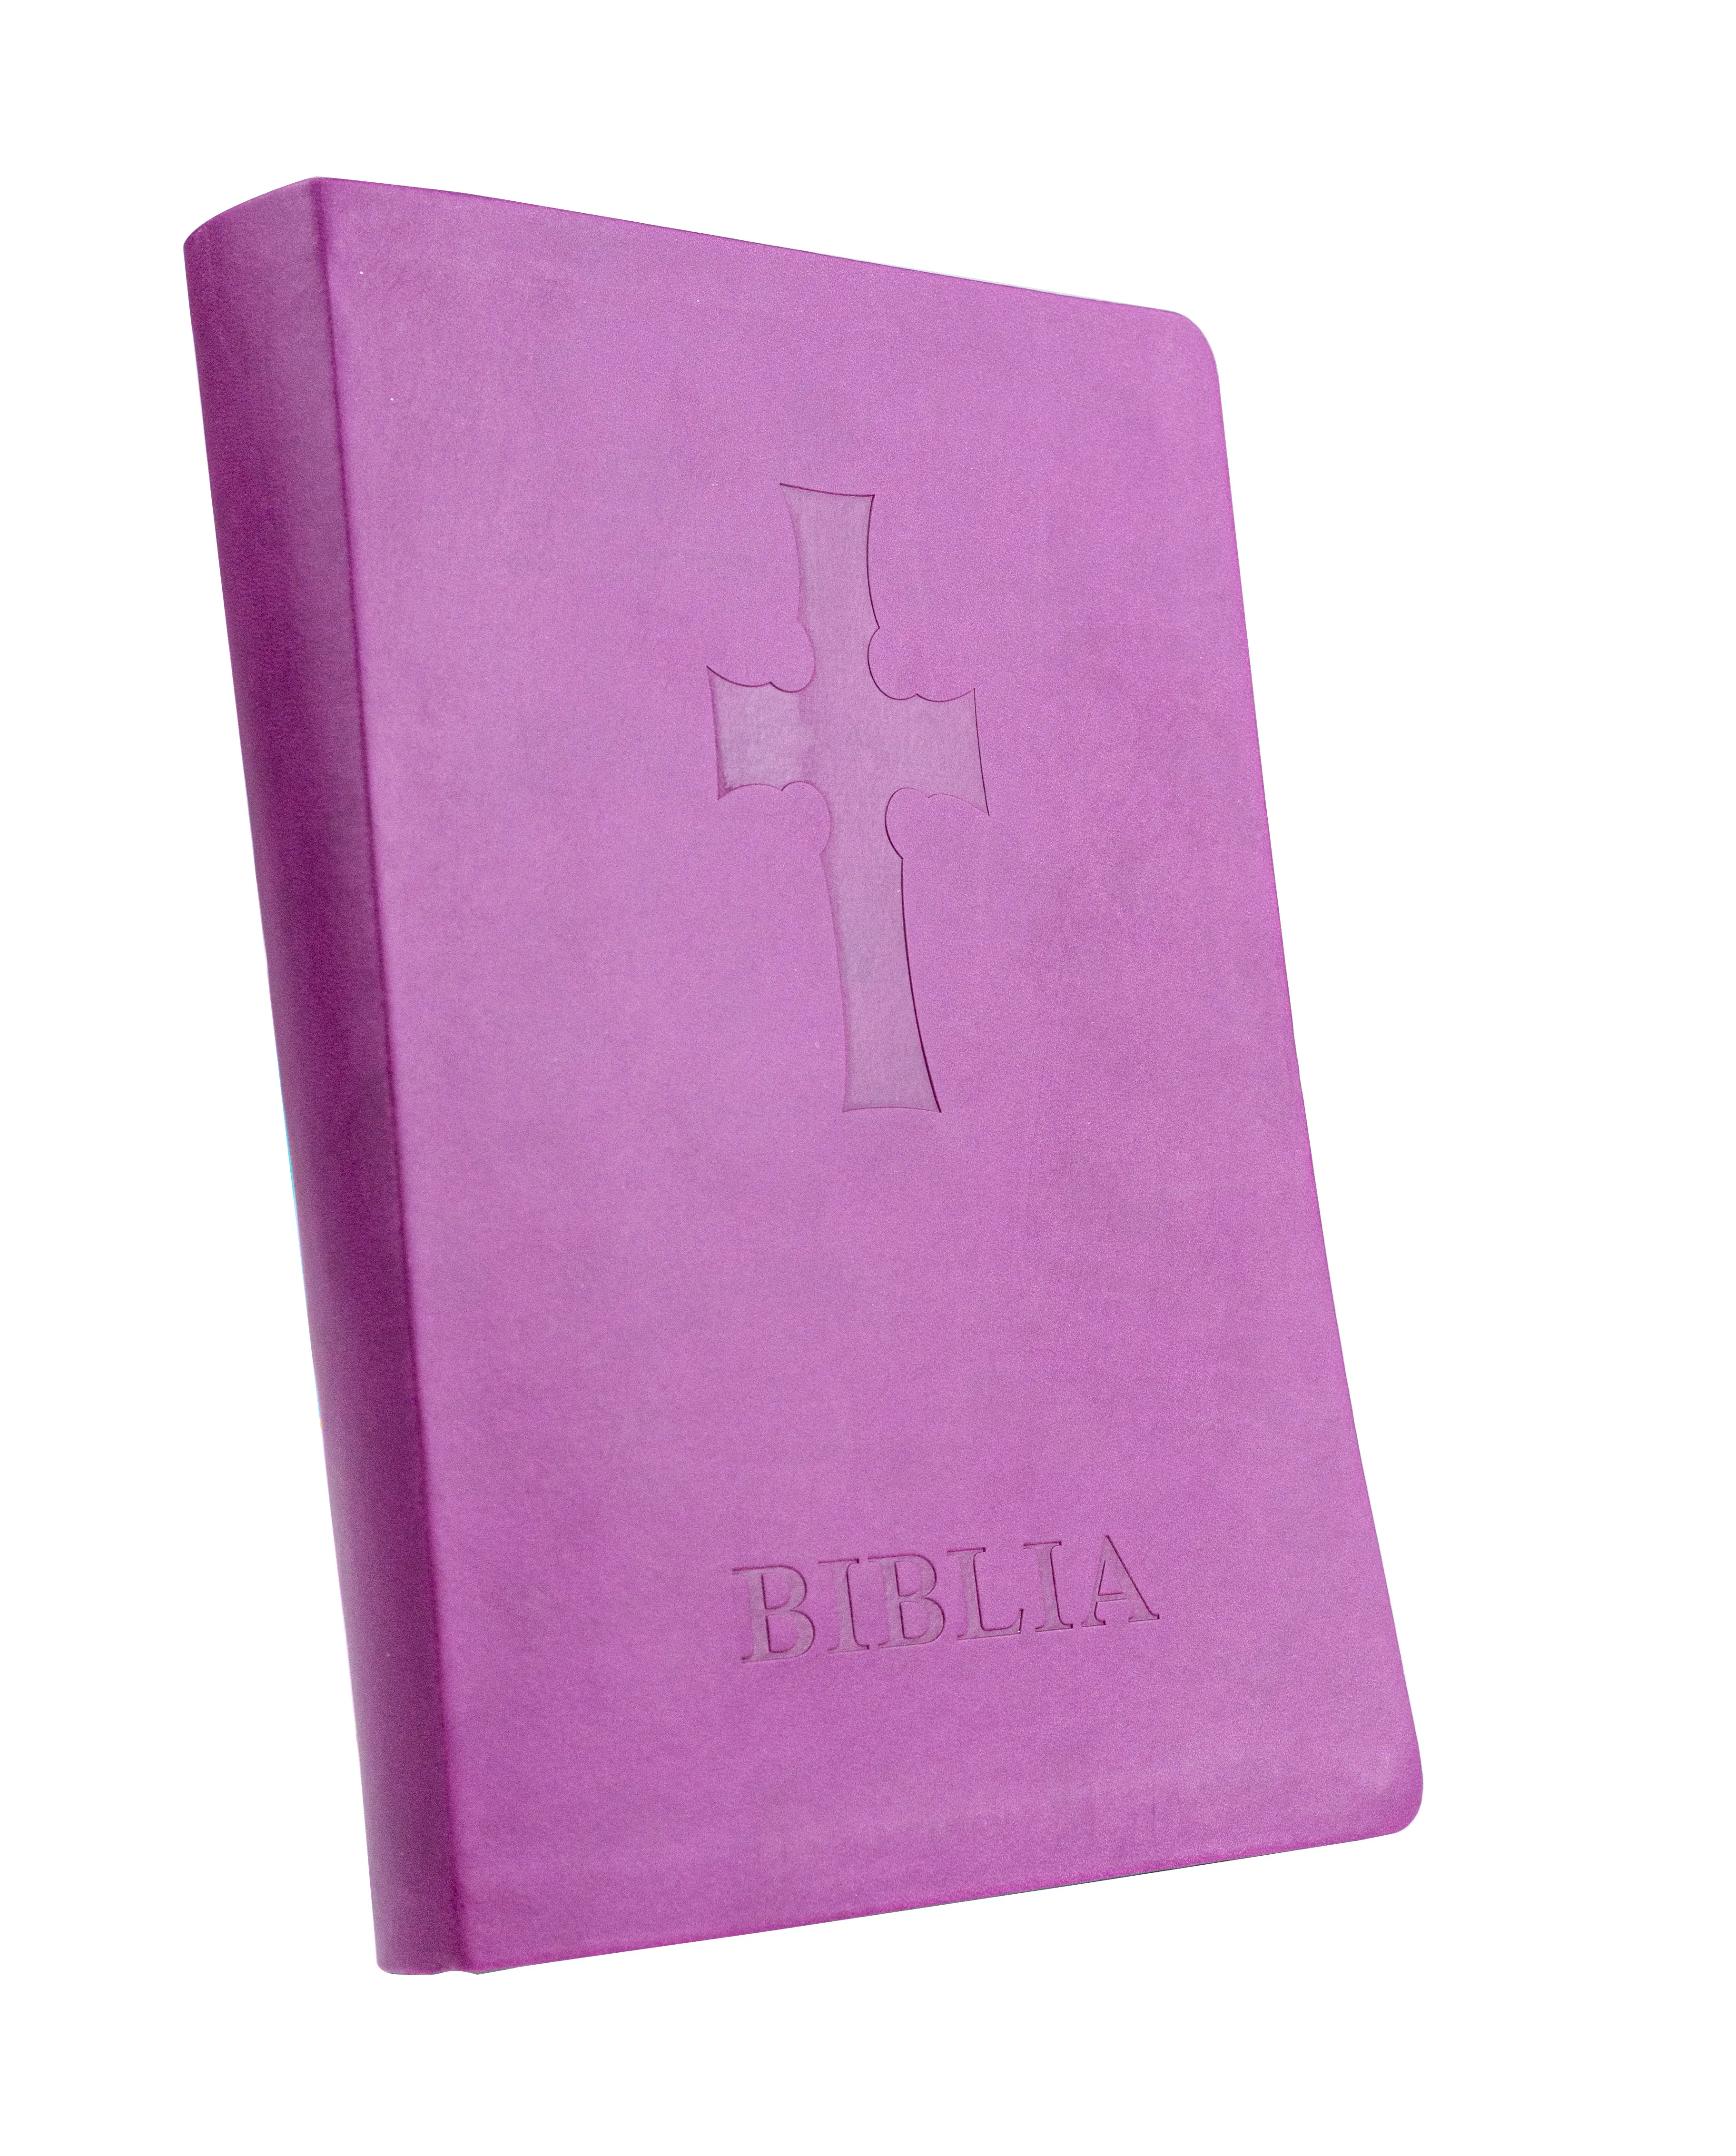 Oem soft pu hardcover book printing service Bible printing service factory